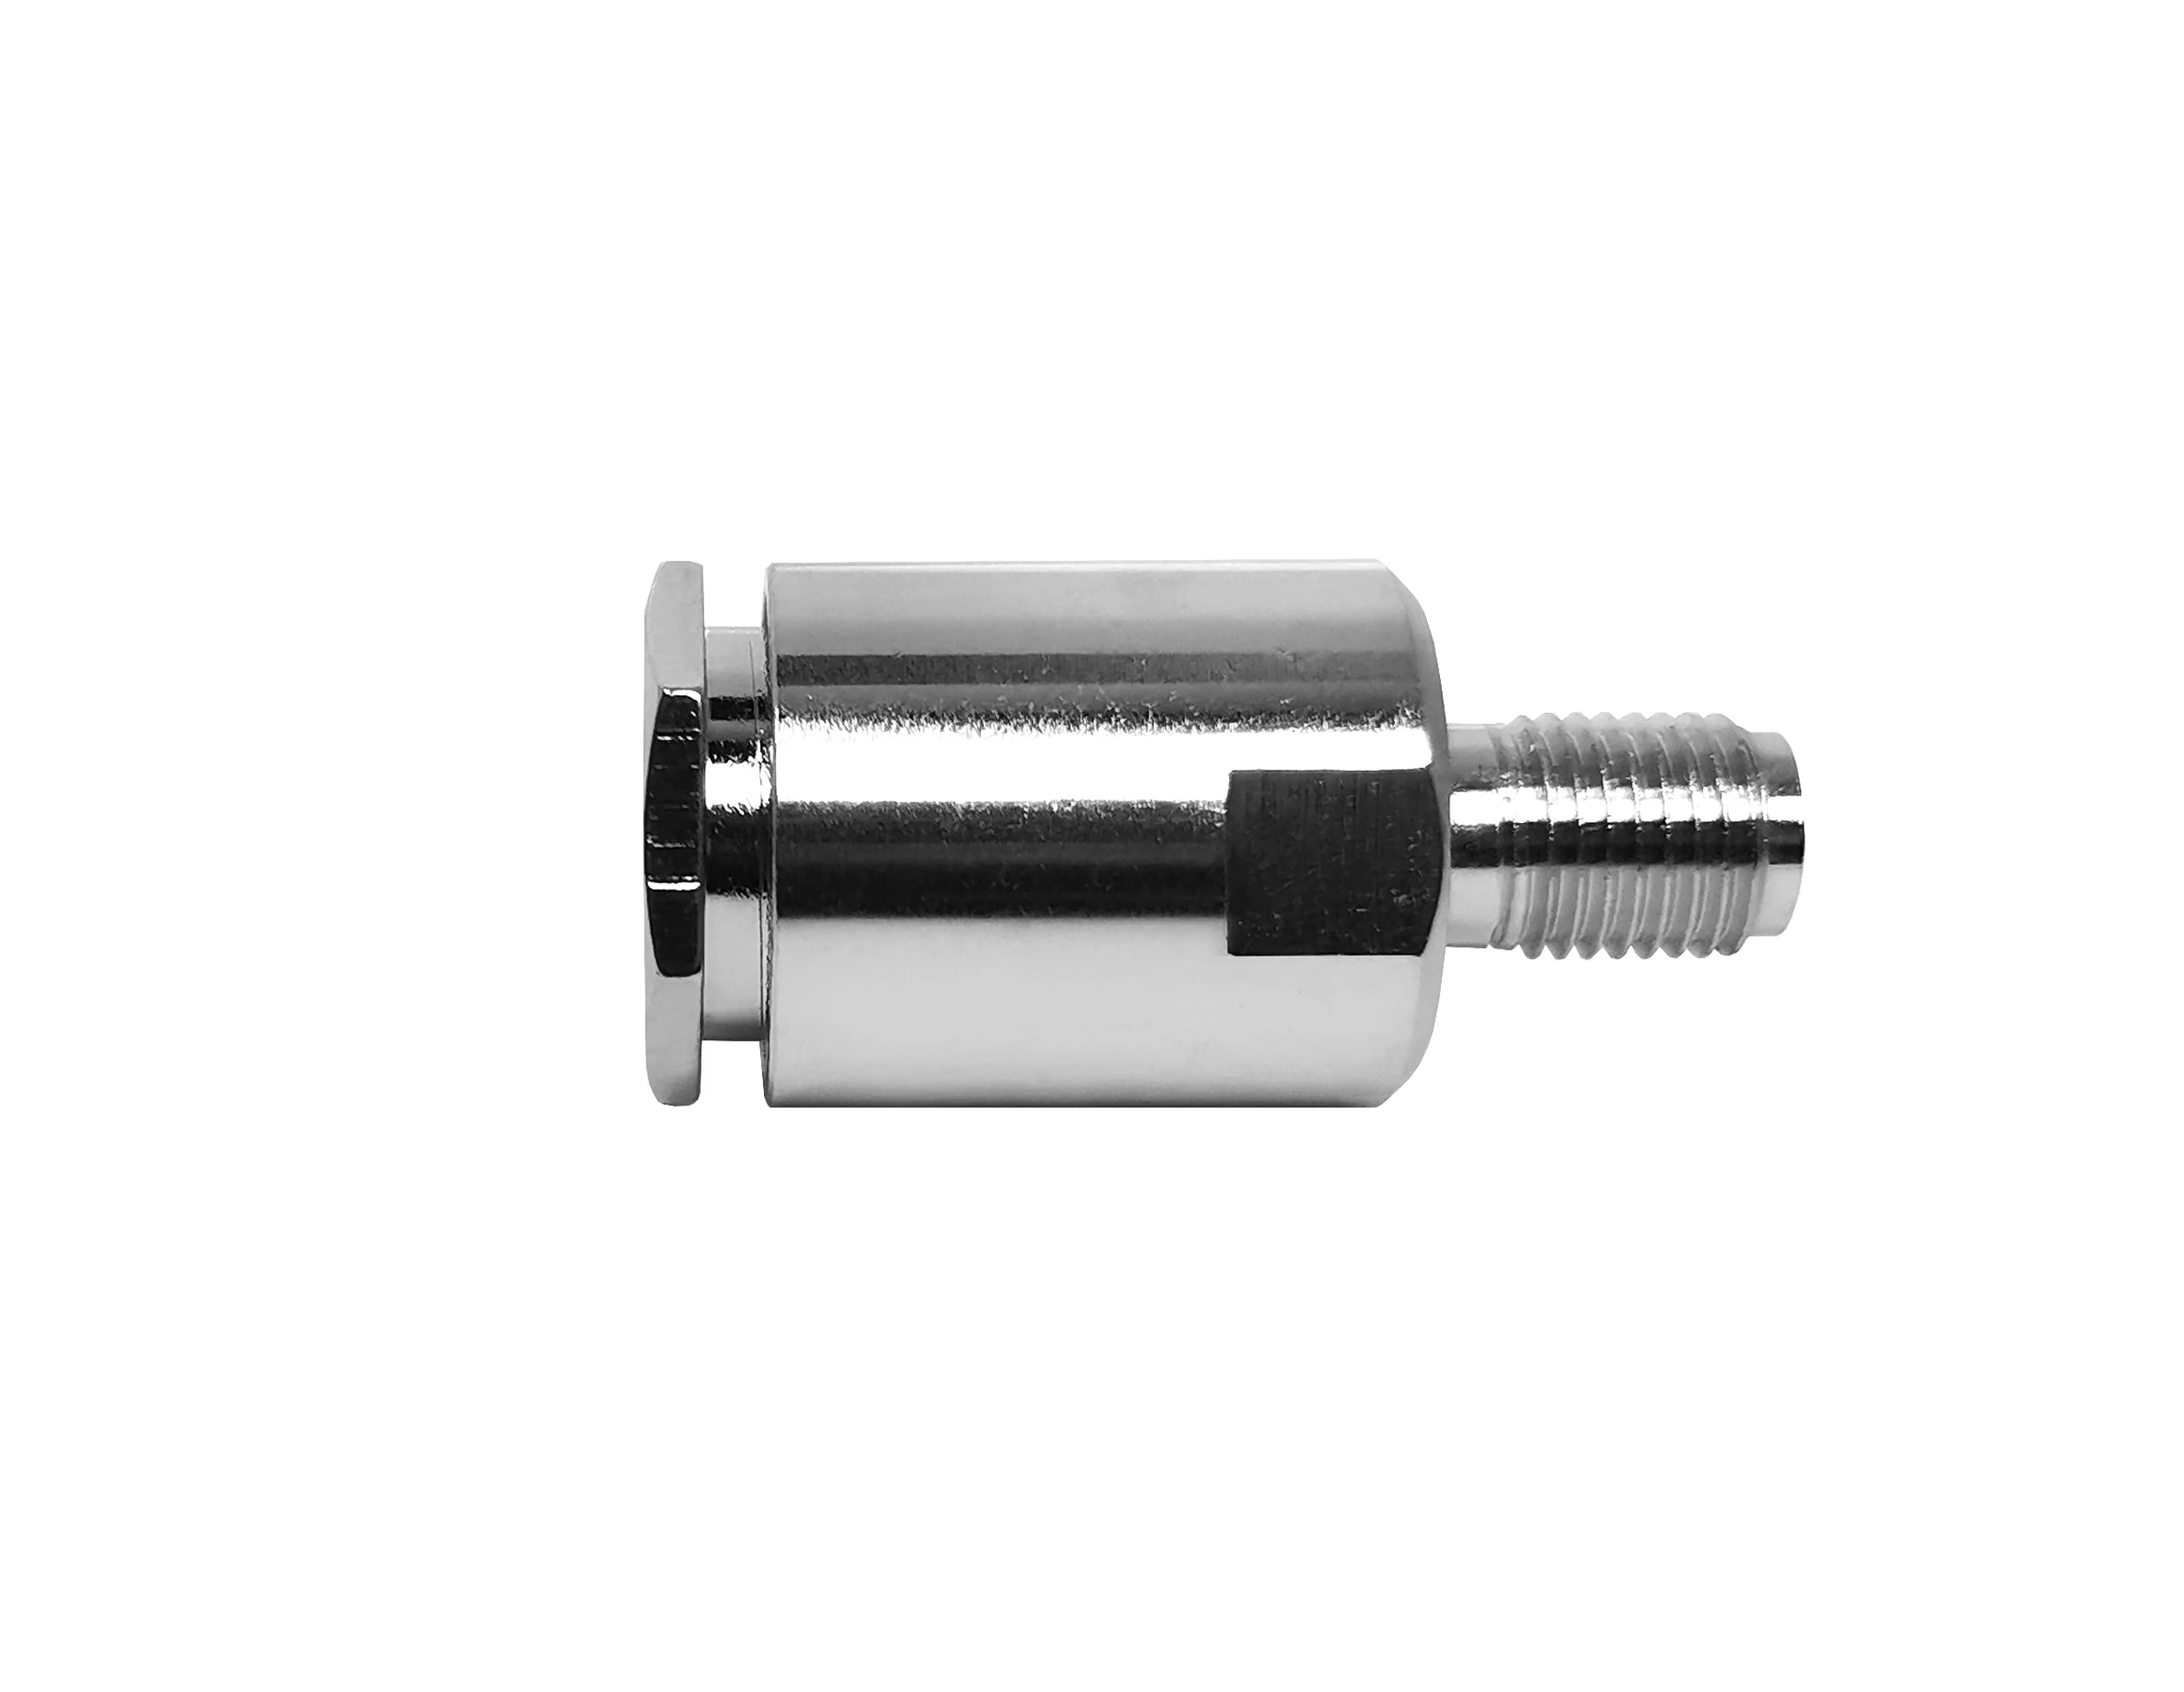 RF connector SMA female jack clamp mount screw lmr240 H155 cable  rf coaxial connectors supplier